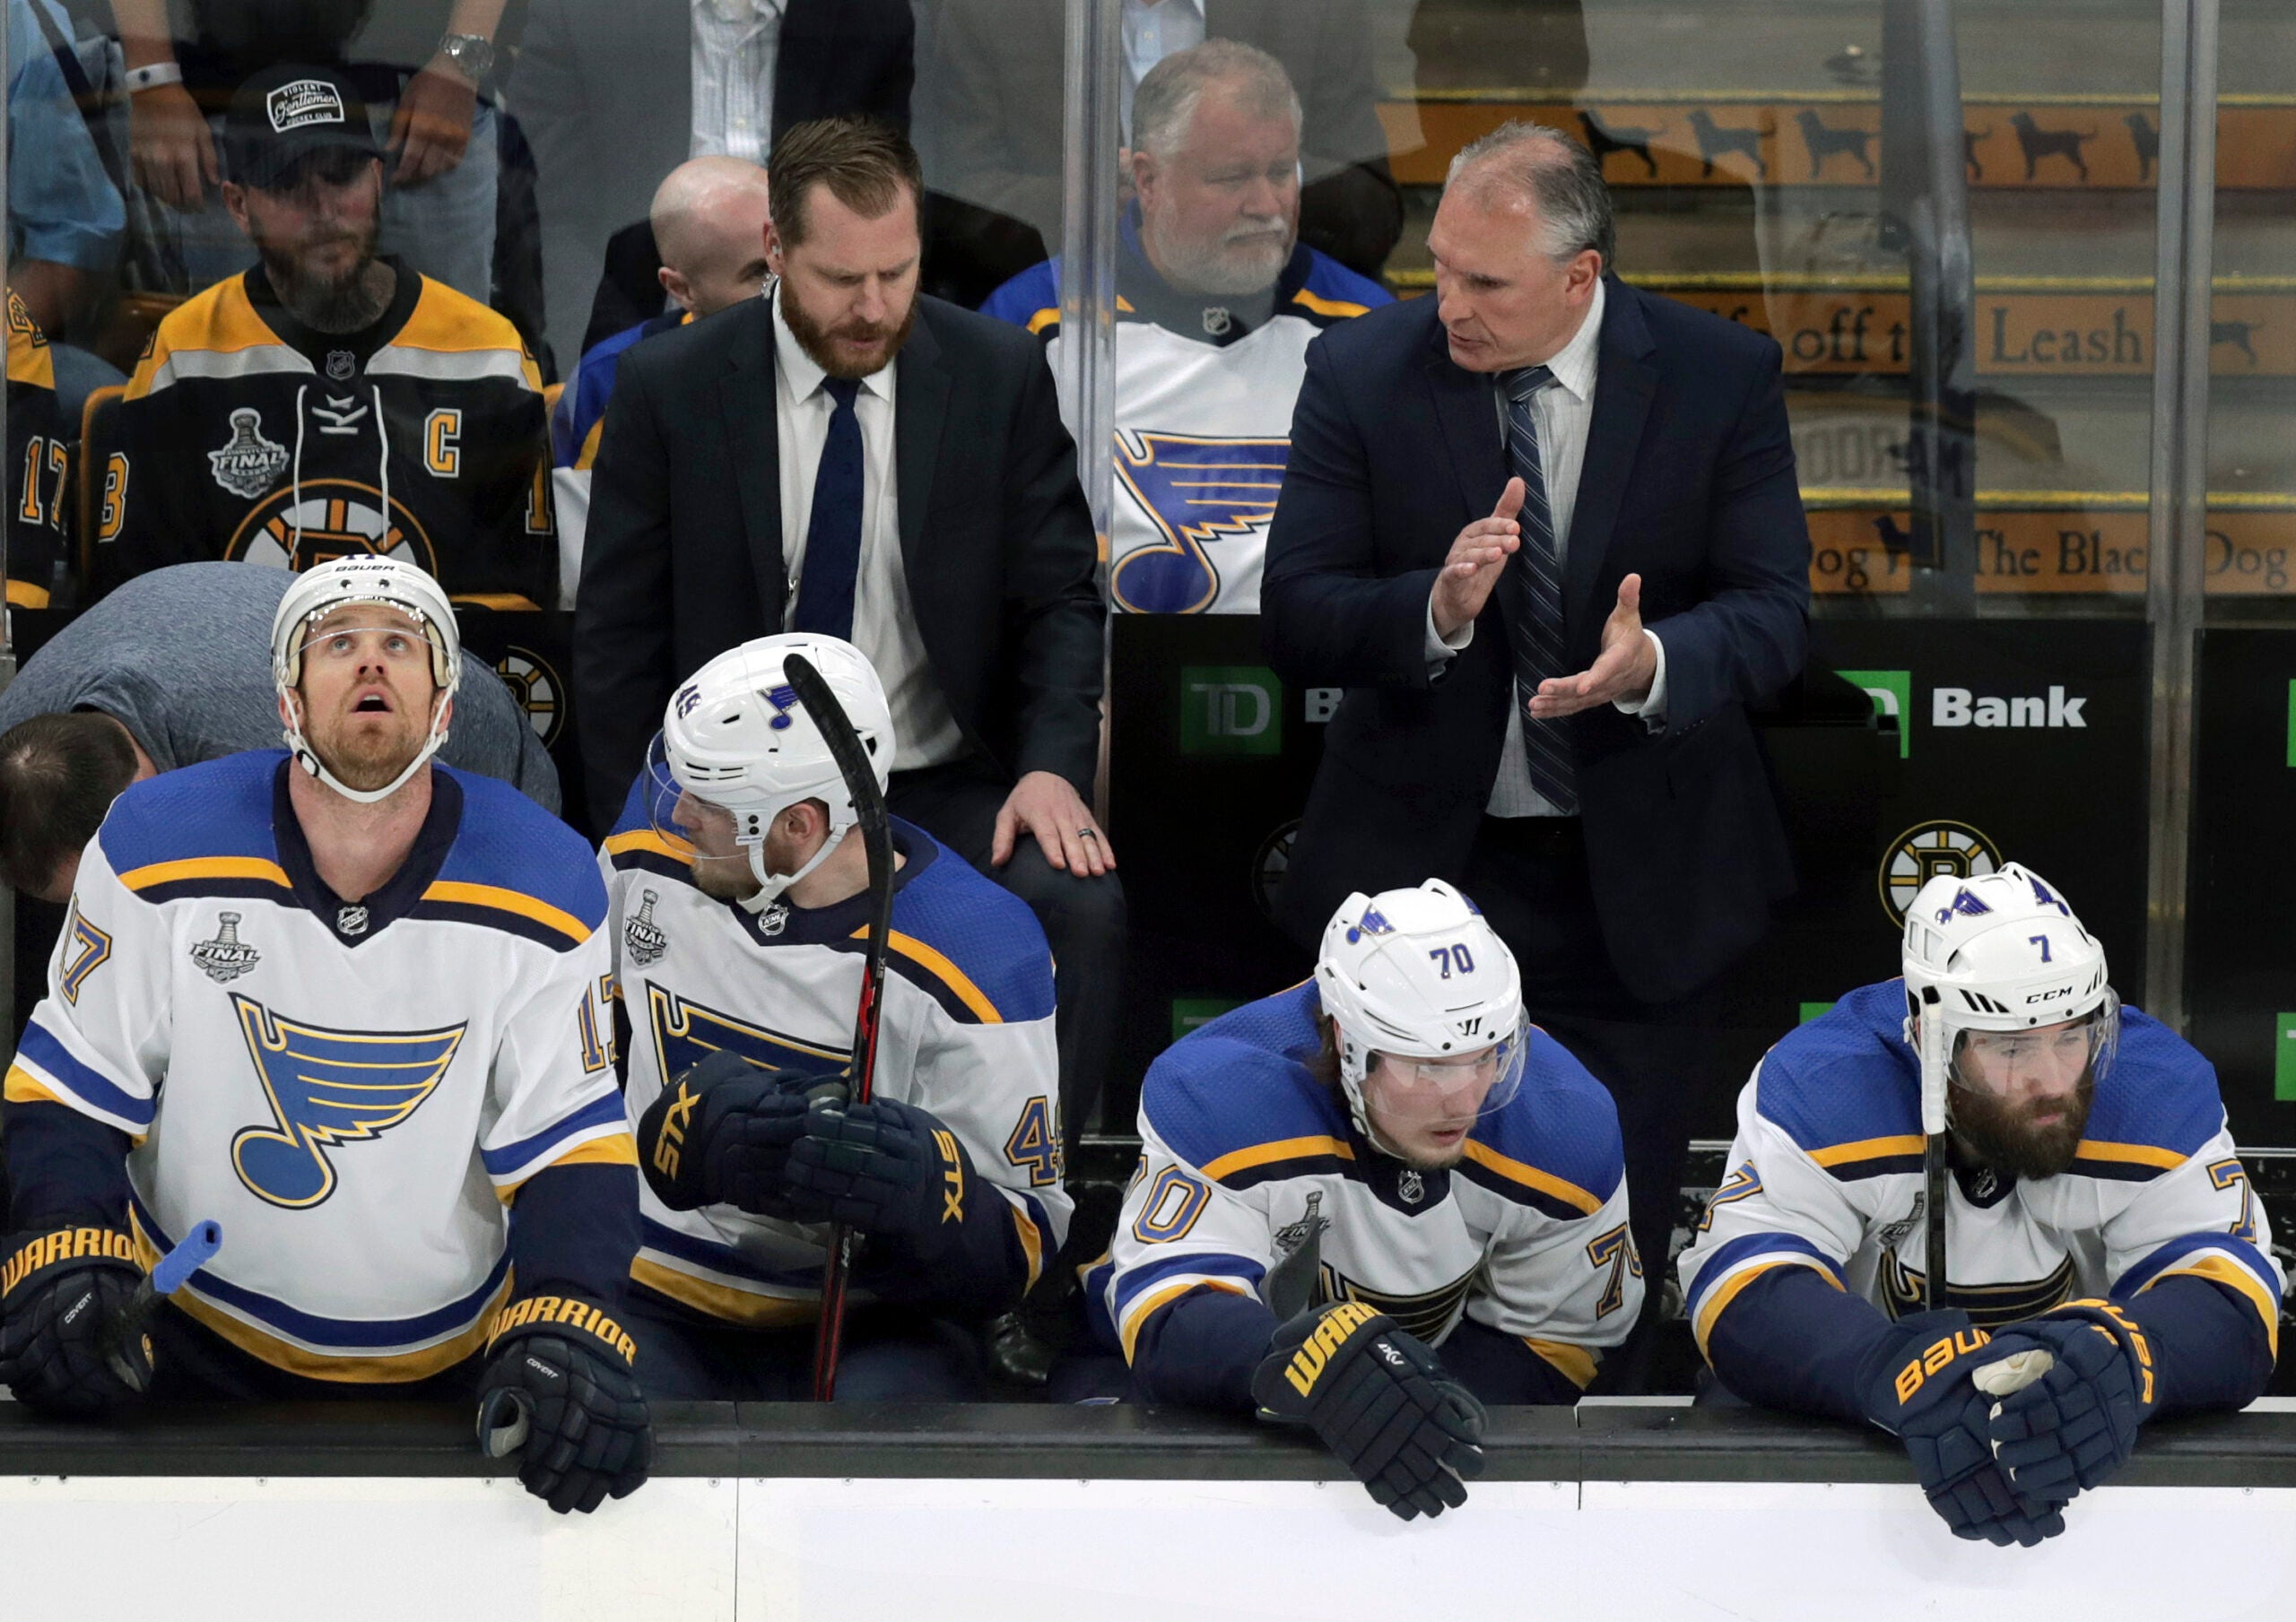 Blues, Barclay gets his Stanley Cup bling